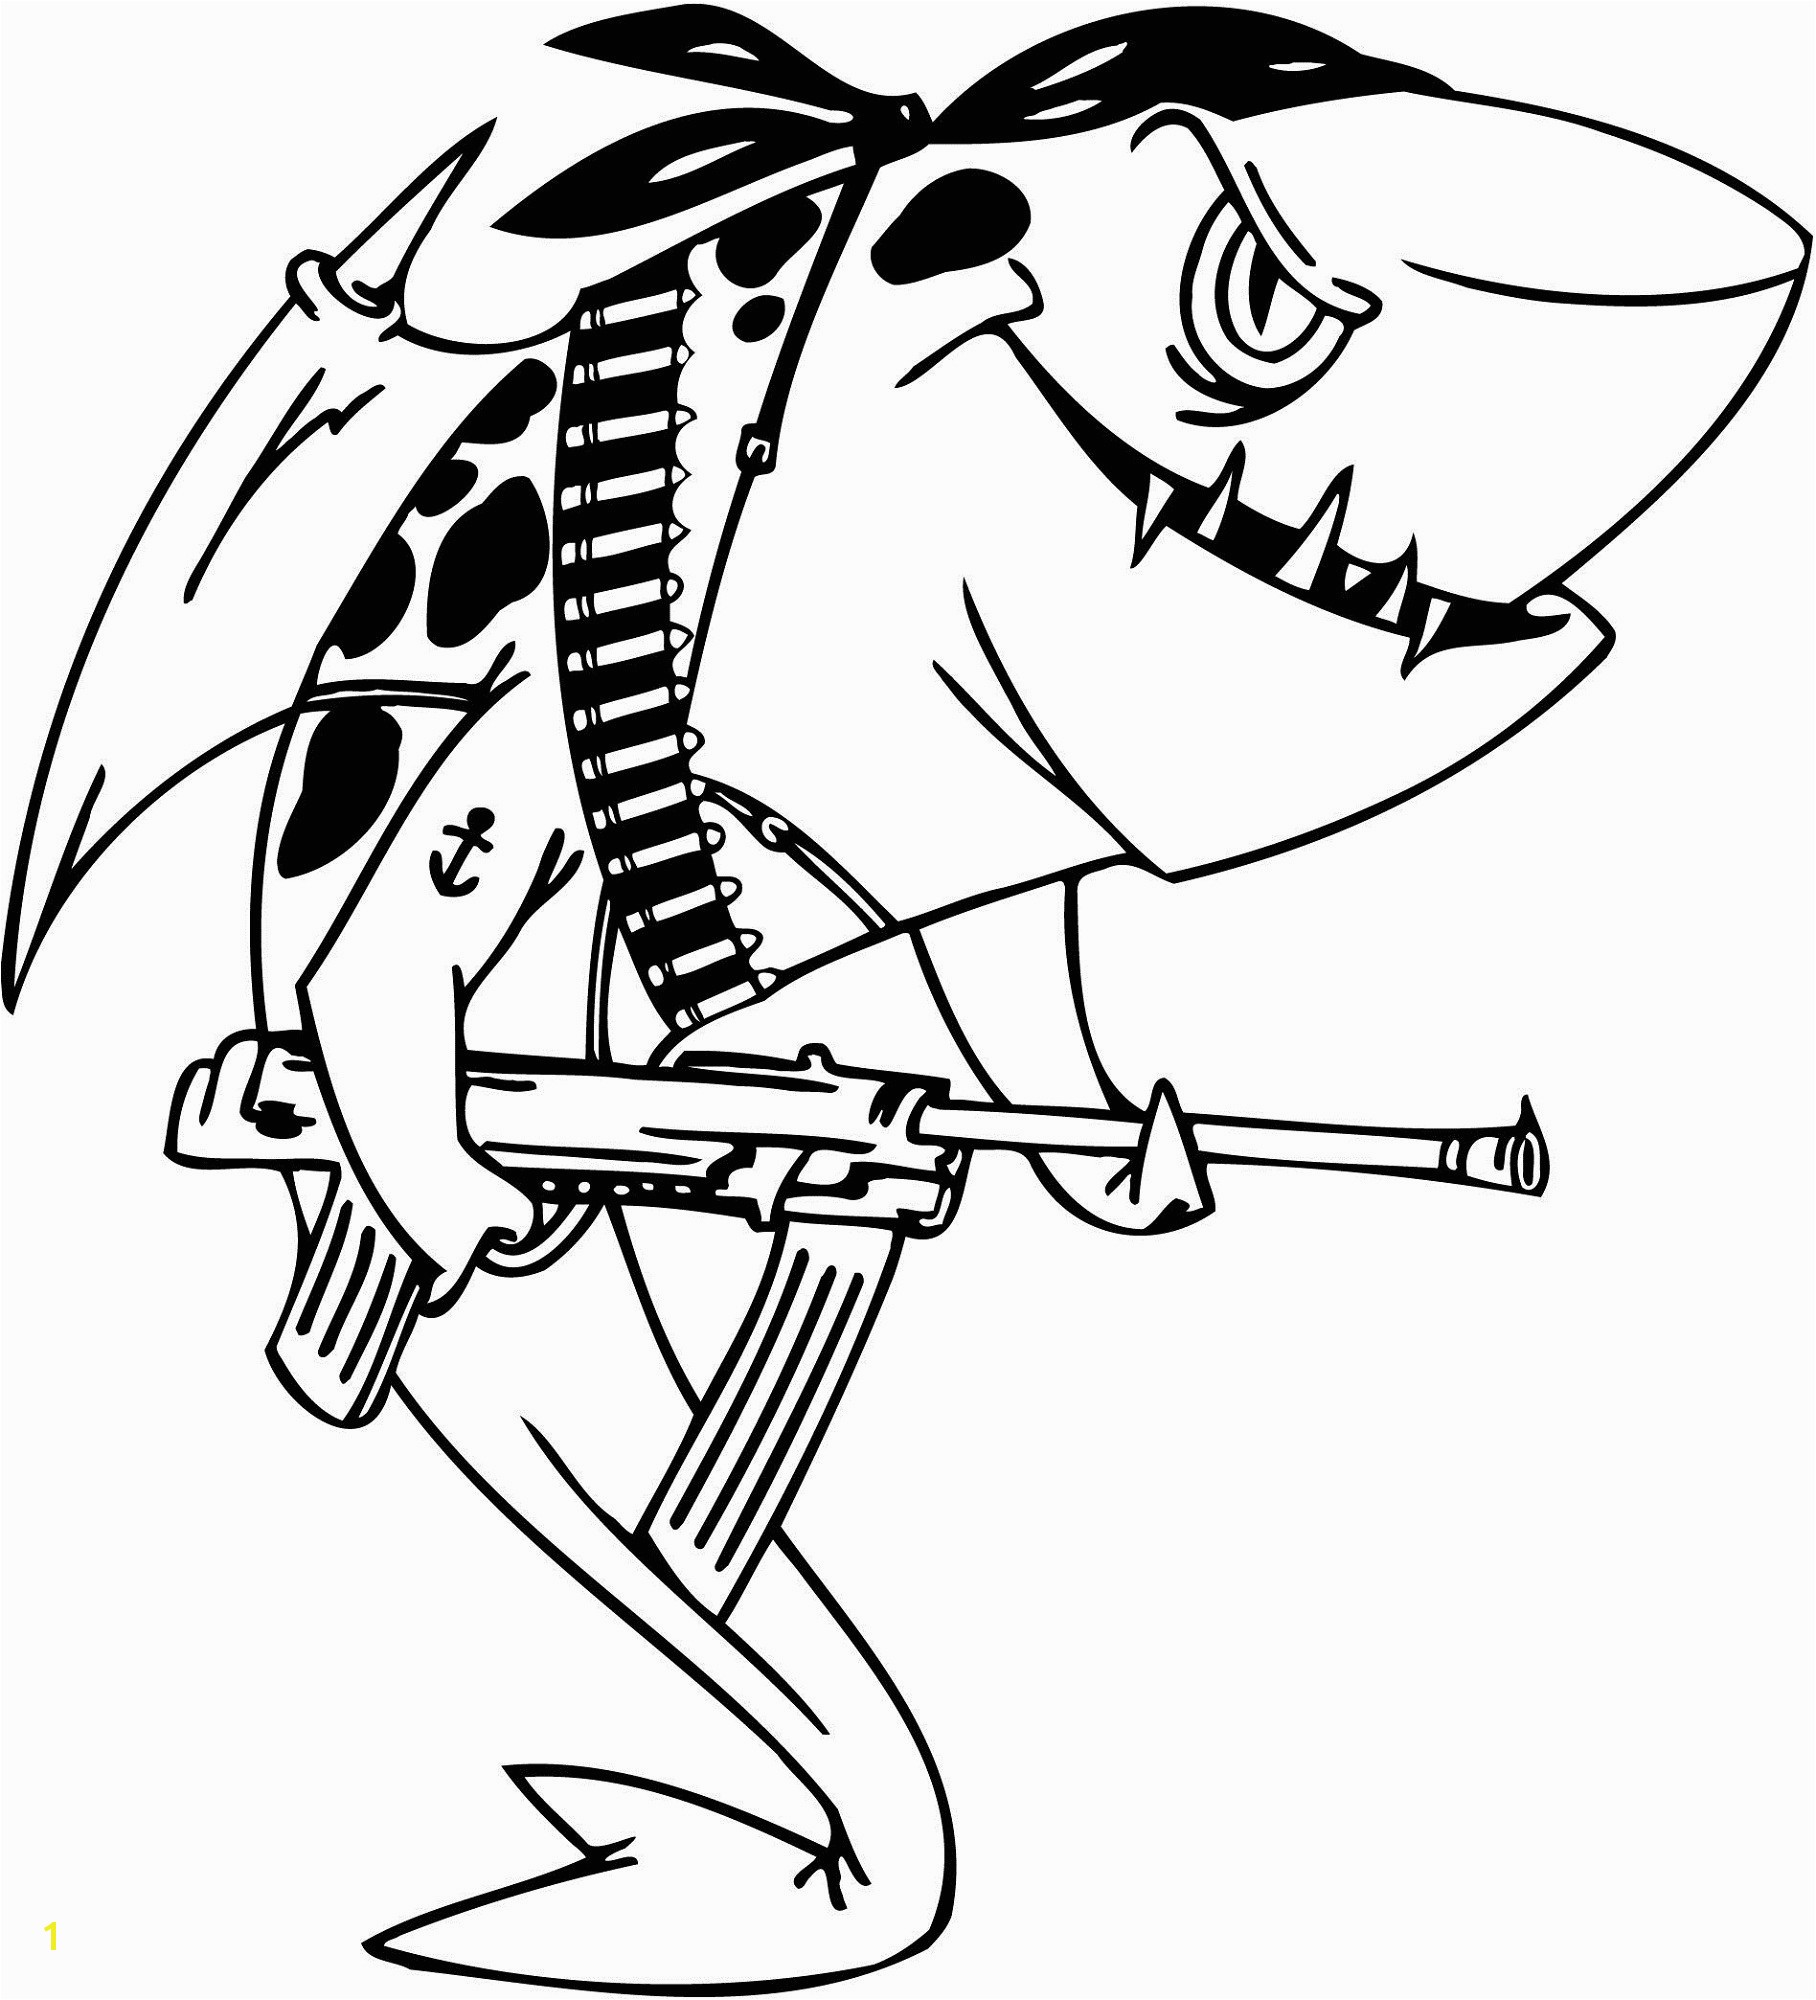 Shark Teeth Coloring Pages Coloring Pages Sharks Fresh Unique Shark Teeth Coloring Pages